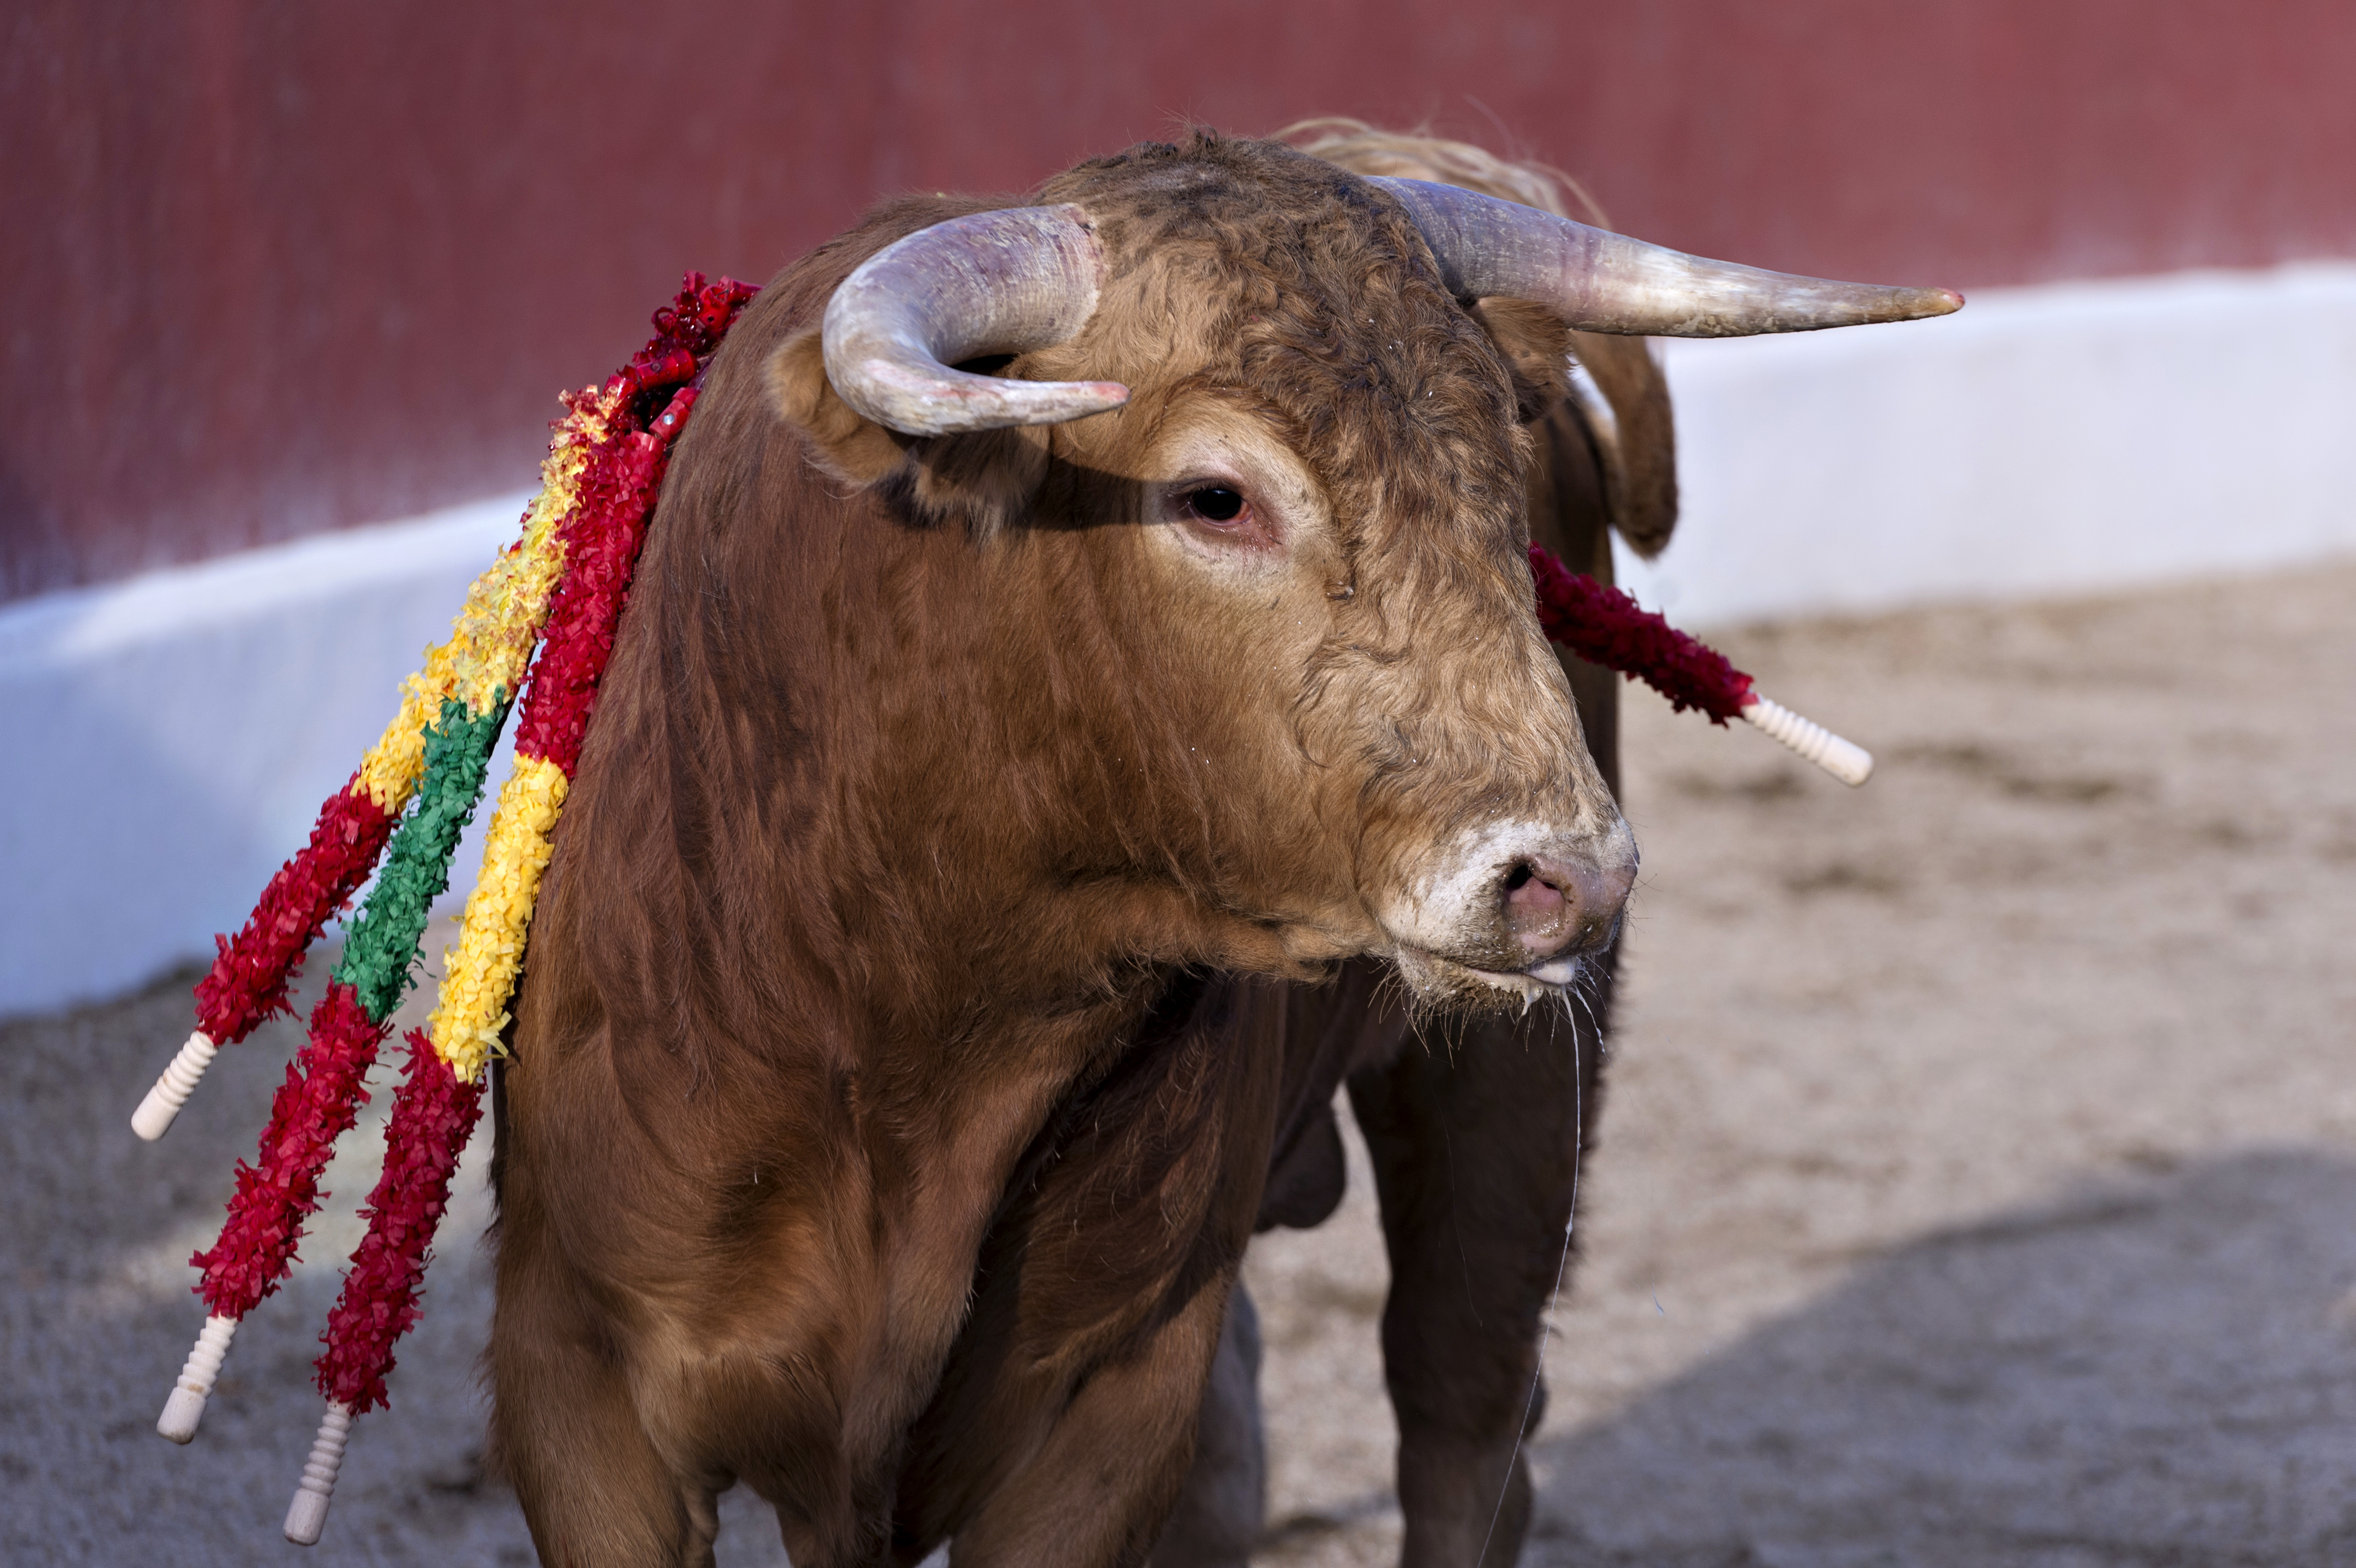 Spain's cruel bullfights have no place in the 21st century · A Humane World